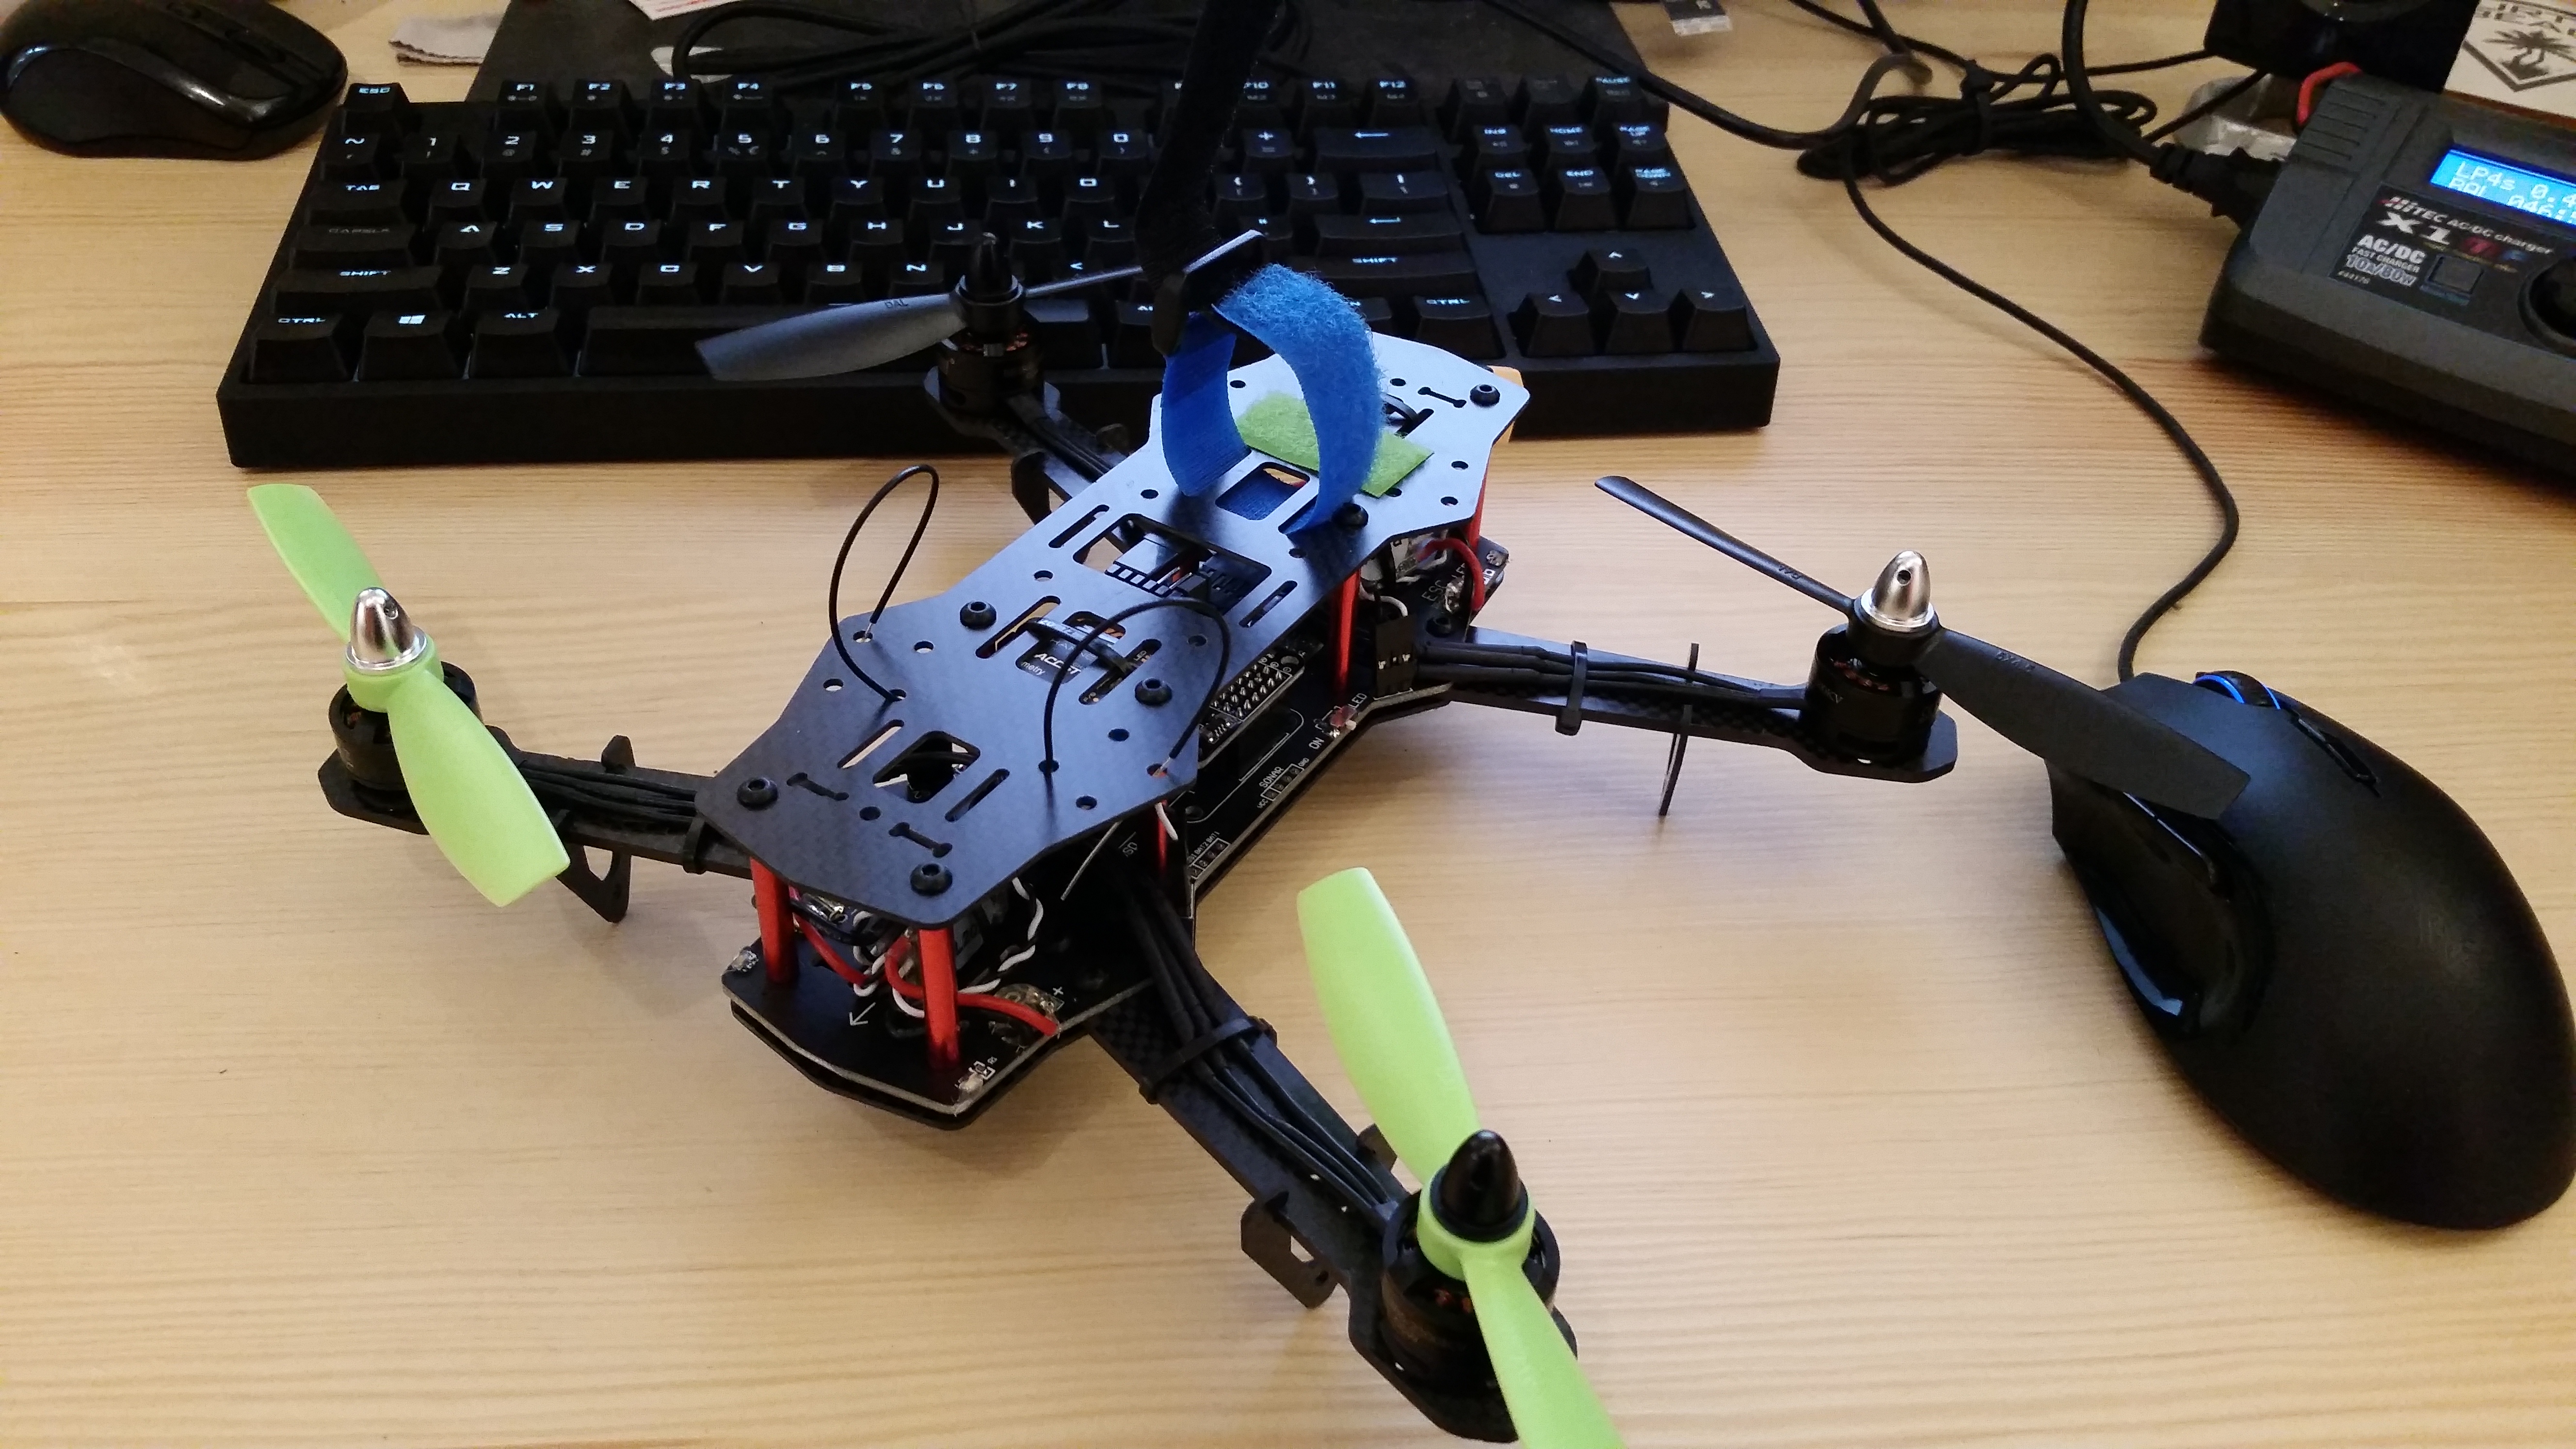 250mm Racing Quad ready for its maiden flight!